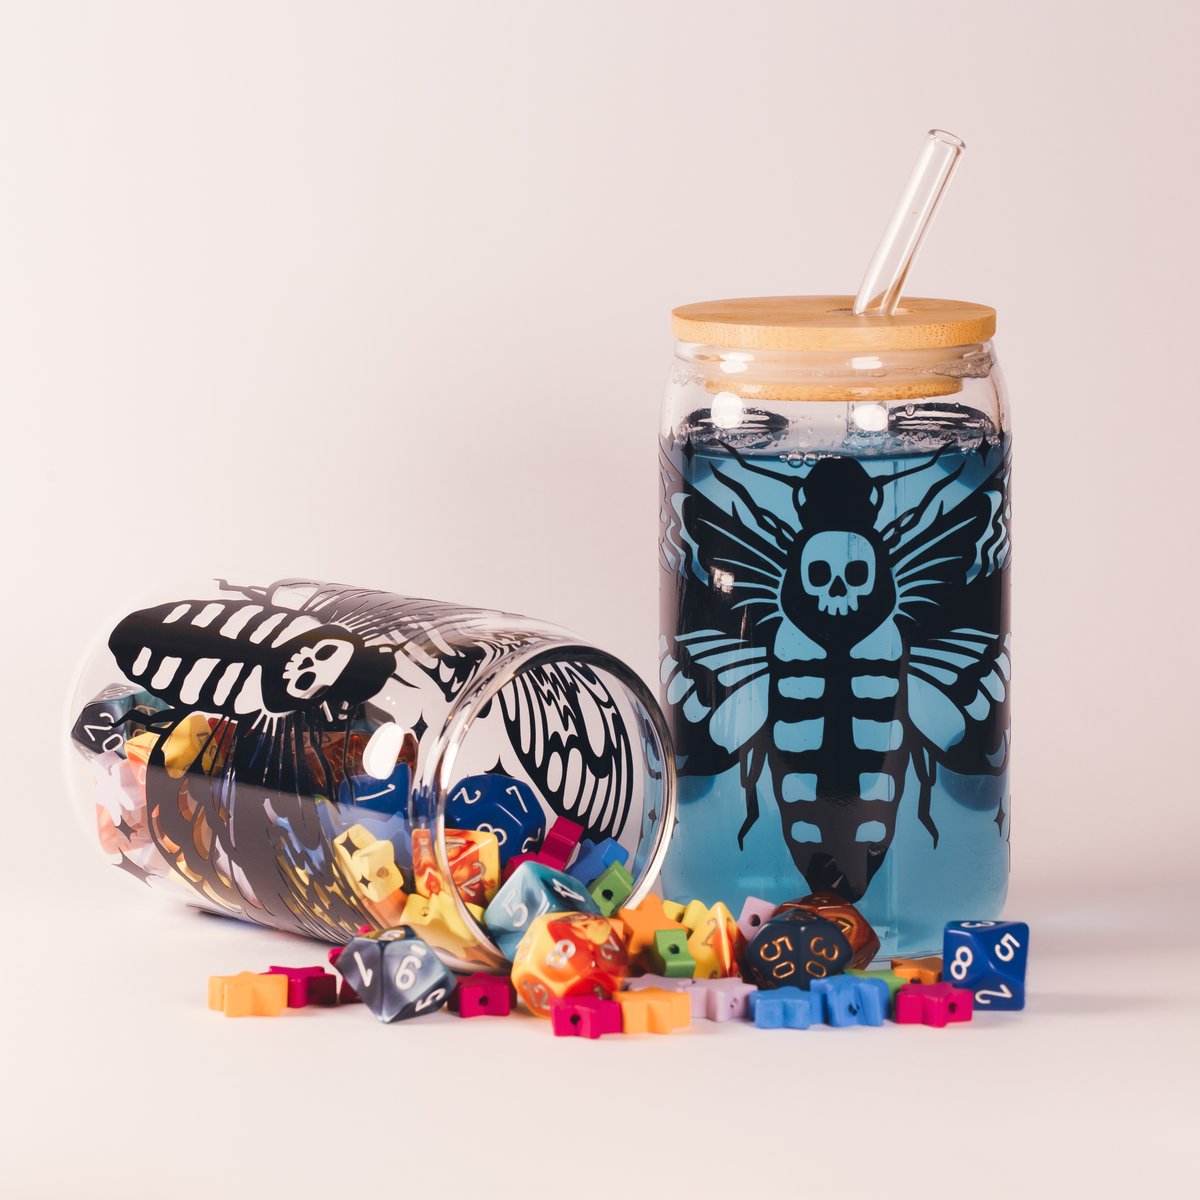 It's just two days away from my store's relaunch, with loads of new stock, and I can't wait to share it all with you!

Sam Blyth has been taking some epic pics of my glassware, and here's the ultimate DnD sippy cup, my Death's Hawk Moth. Never spill on your character sheet again!